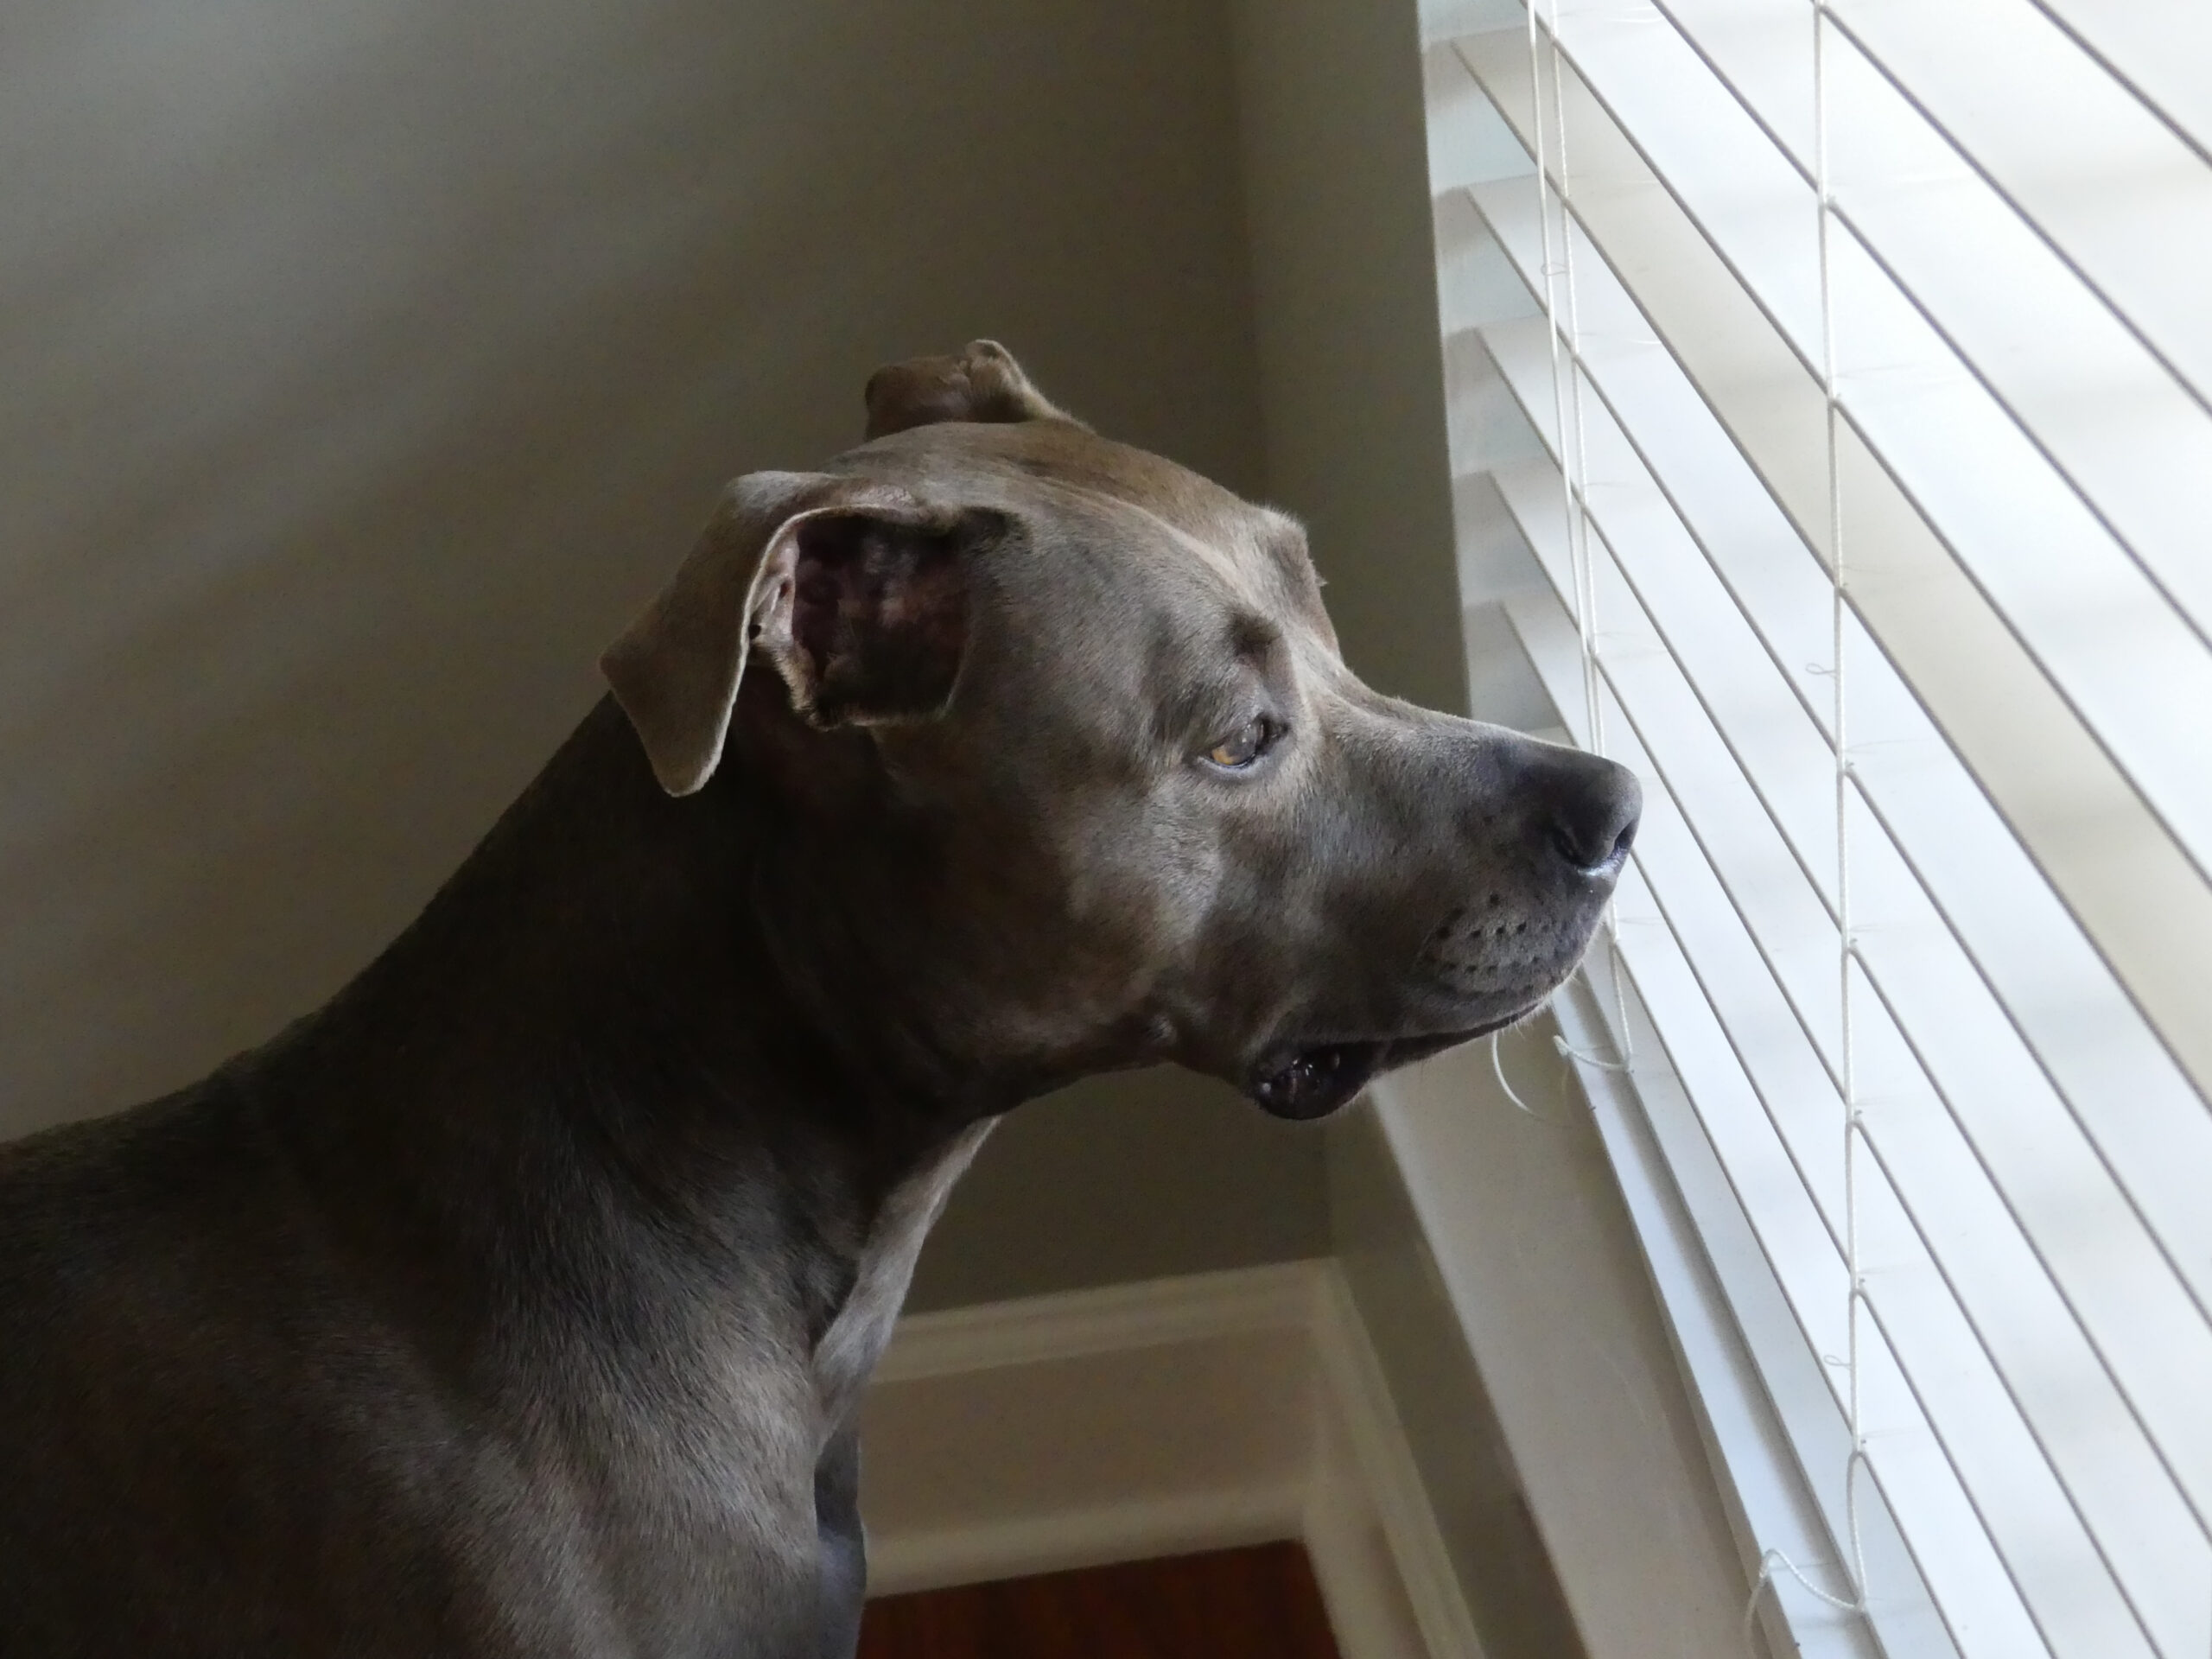 pet friendly blinds shown as grey dog looks out window through venetian blinds